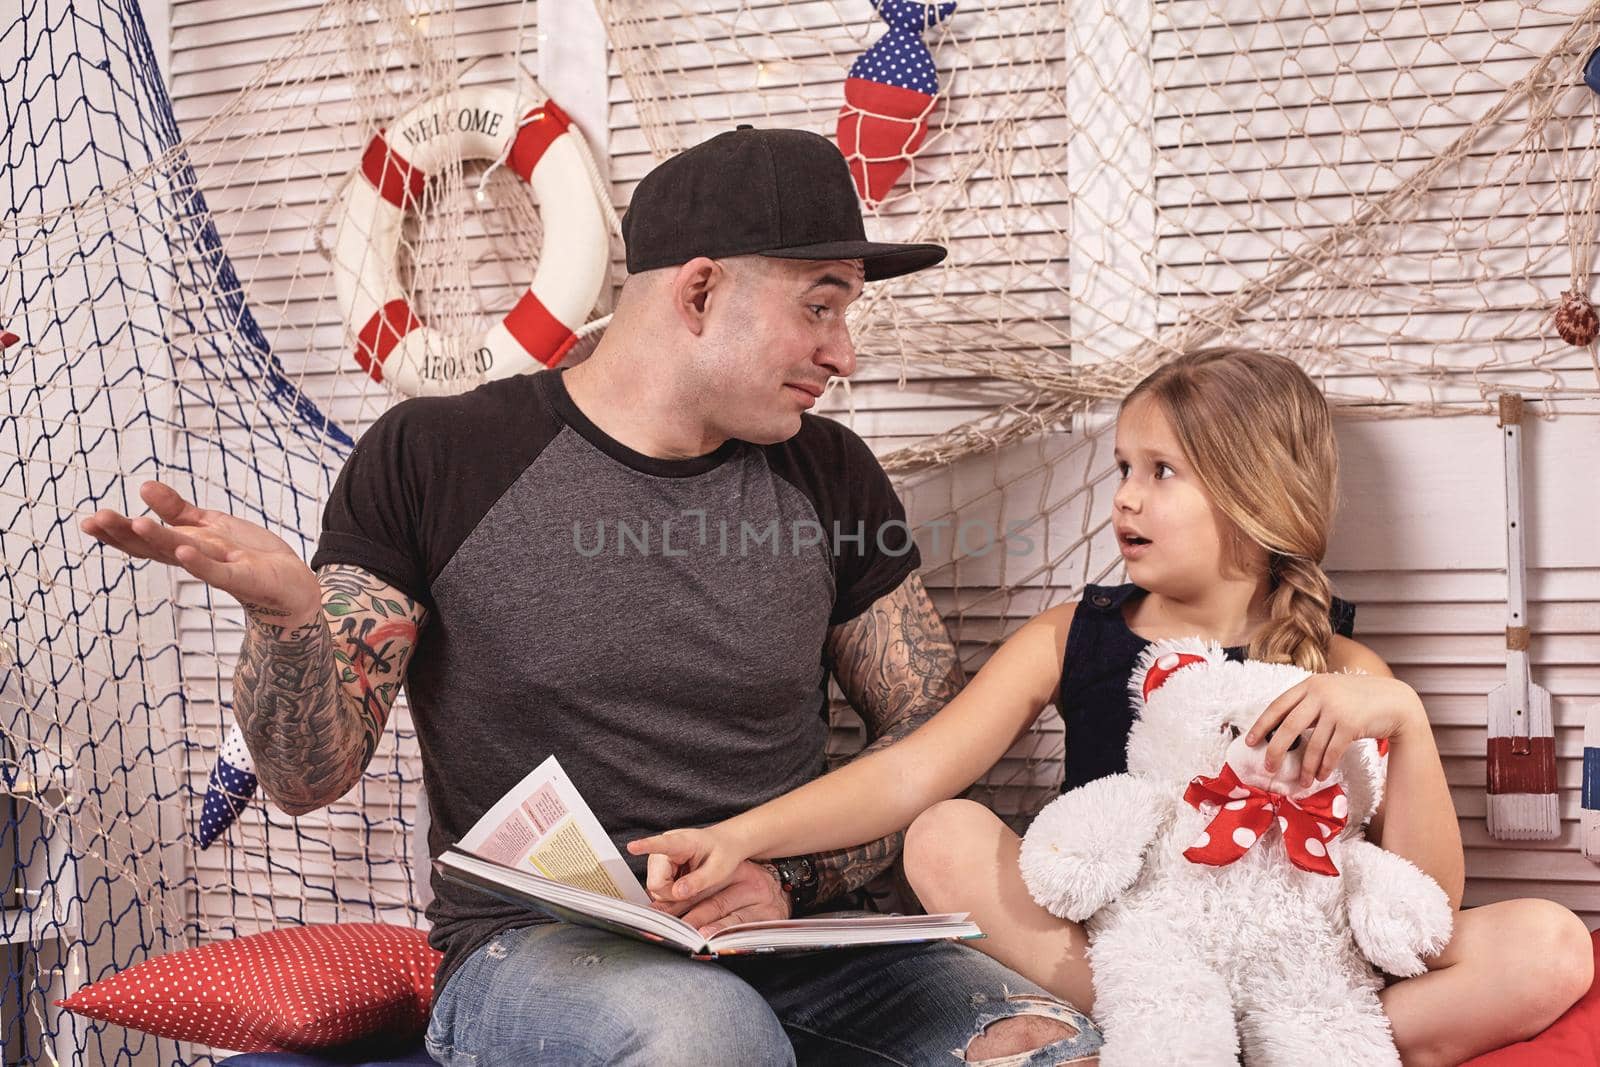 Athletic tattoed man in a cap is spending time with his little cute daughter. They are sitting on a white bench with some red pillows, in a room decorated in a marine style. She is holding a toy bear, pointing on something in a book and looking at her daddy. Reading fairytales while daughter is sitting nearby. Happy family.